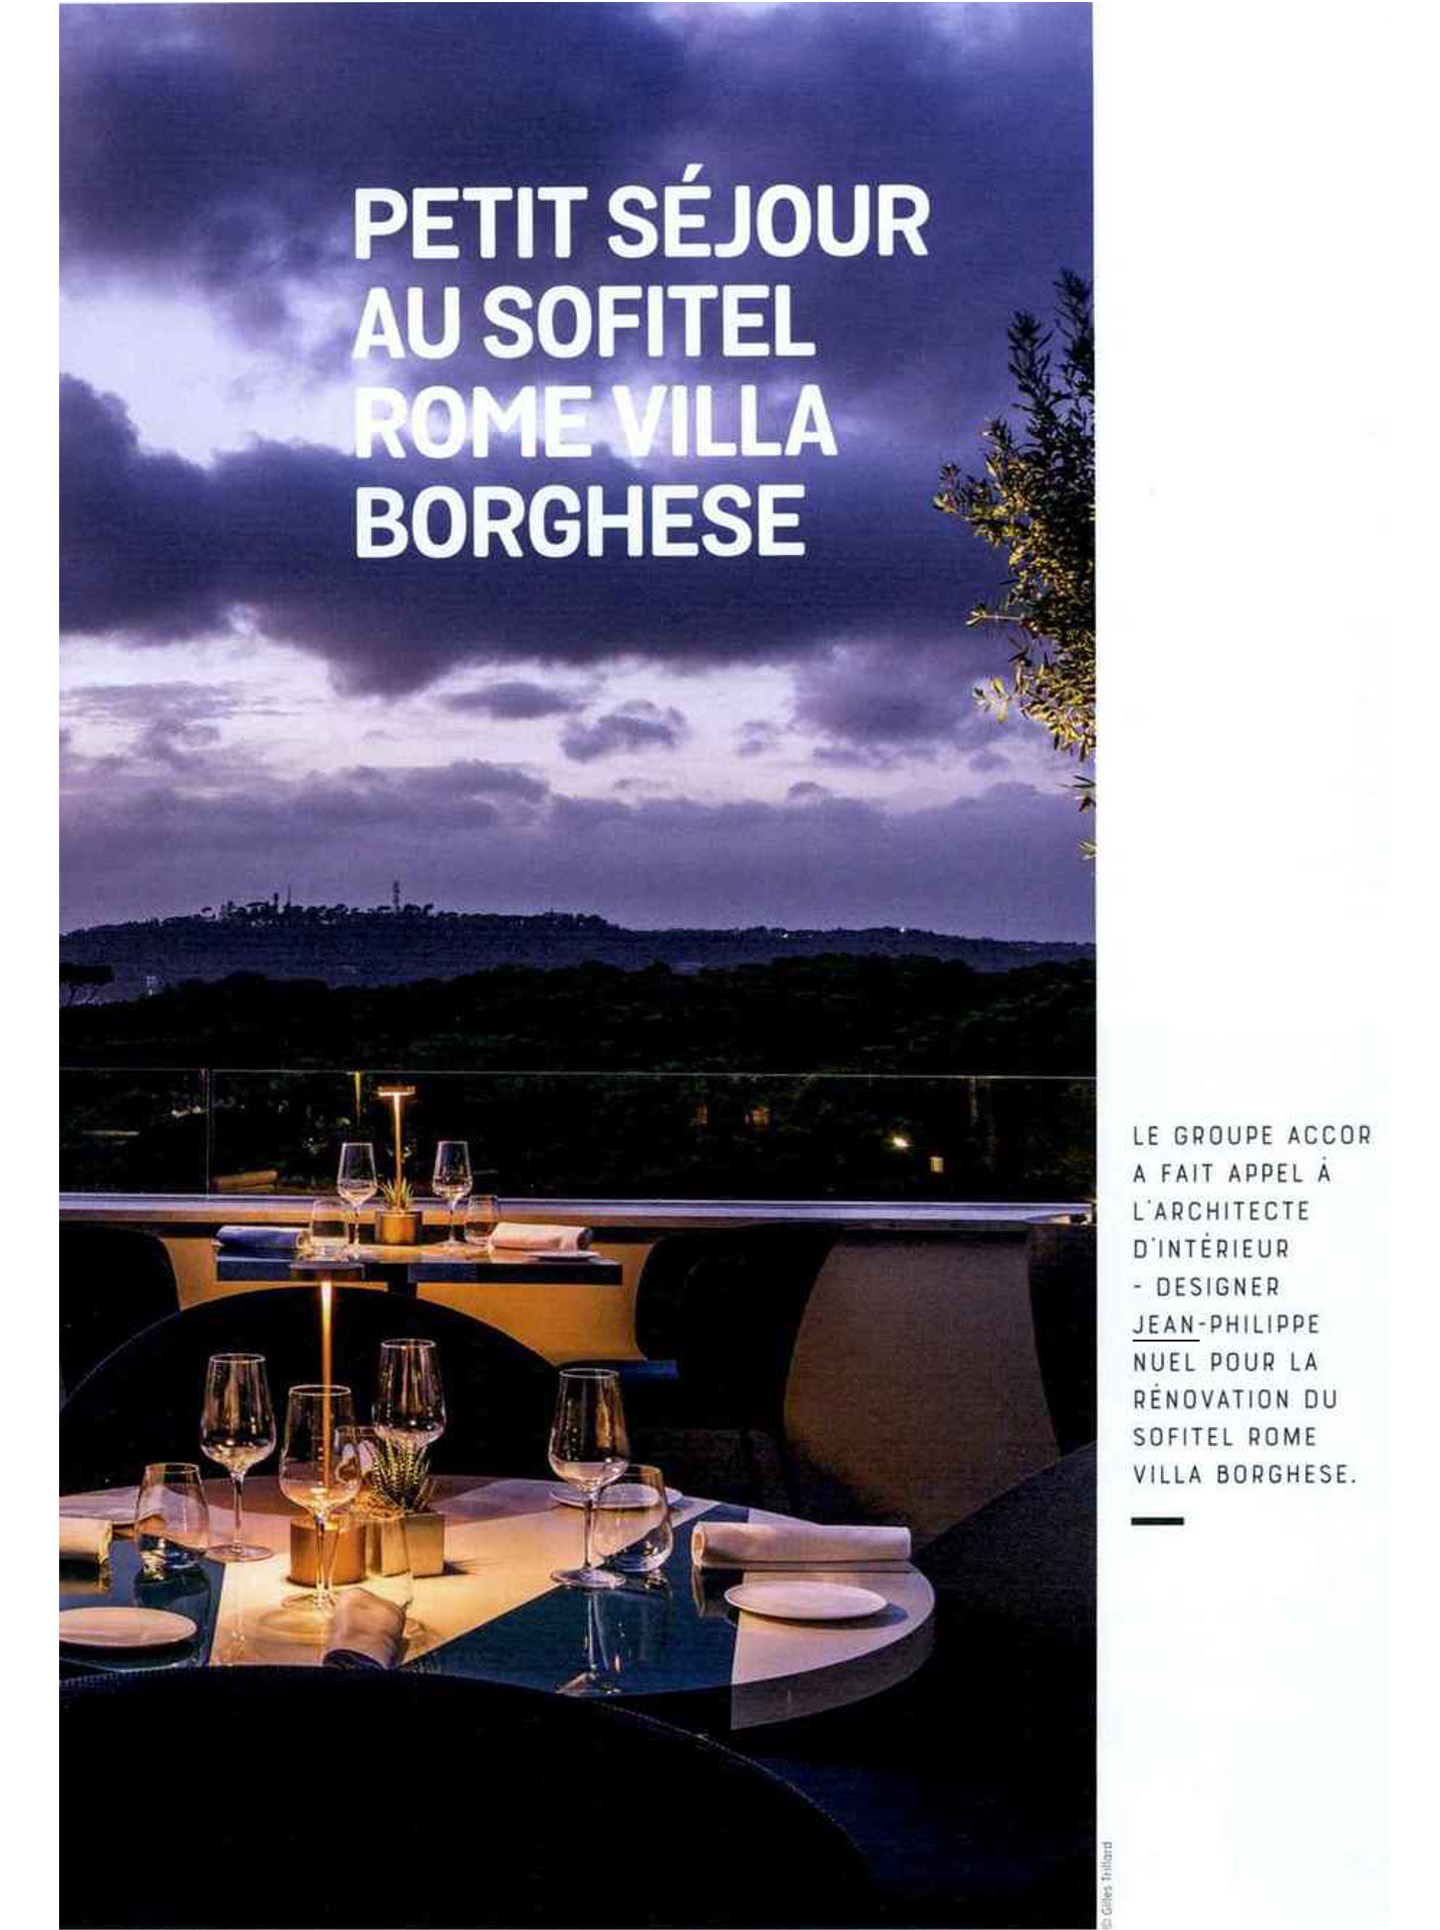 Article on the Sofitel Rome Villa Borghese realized by the studio jean-Philippe Nuel in the magazine nda, new lifestyle hotel, luxury interior design, luxury hotel in italy